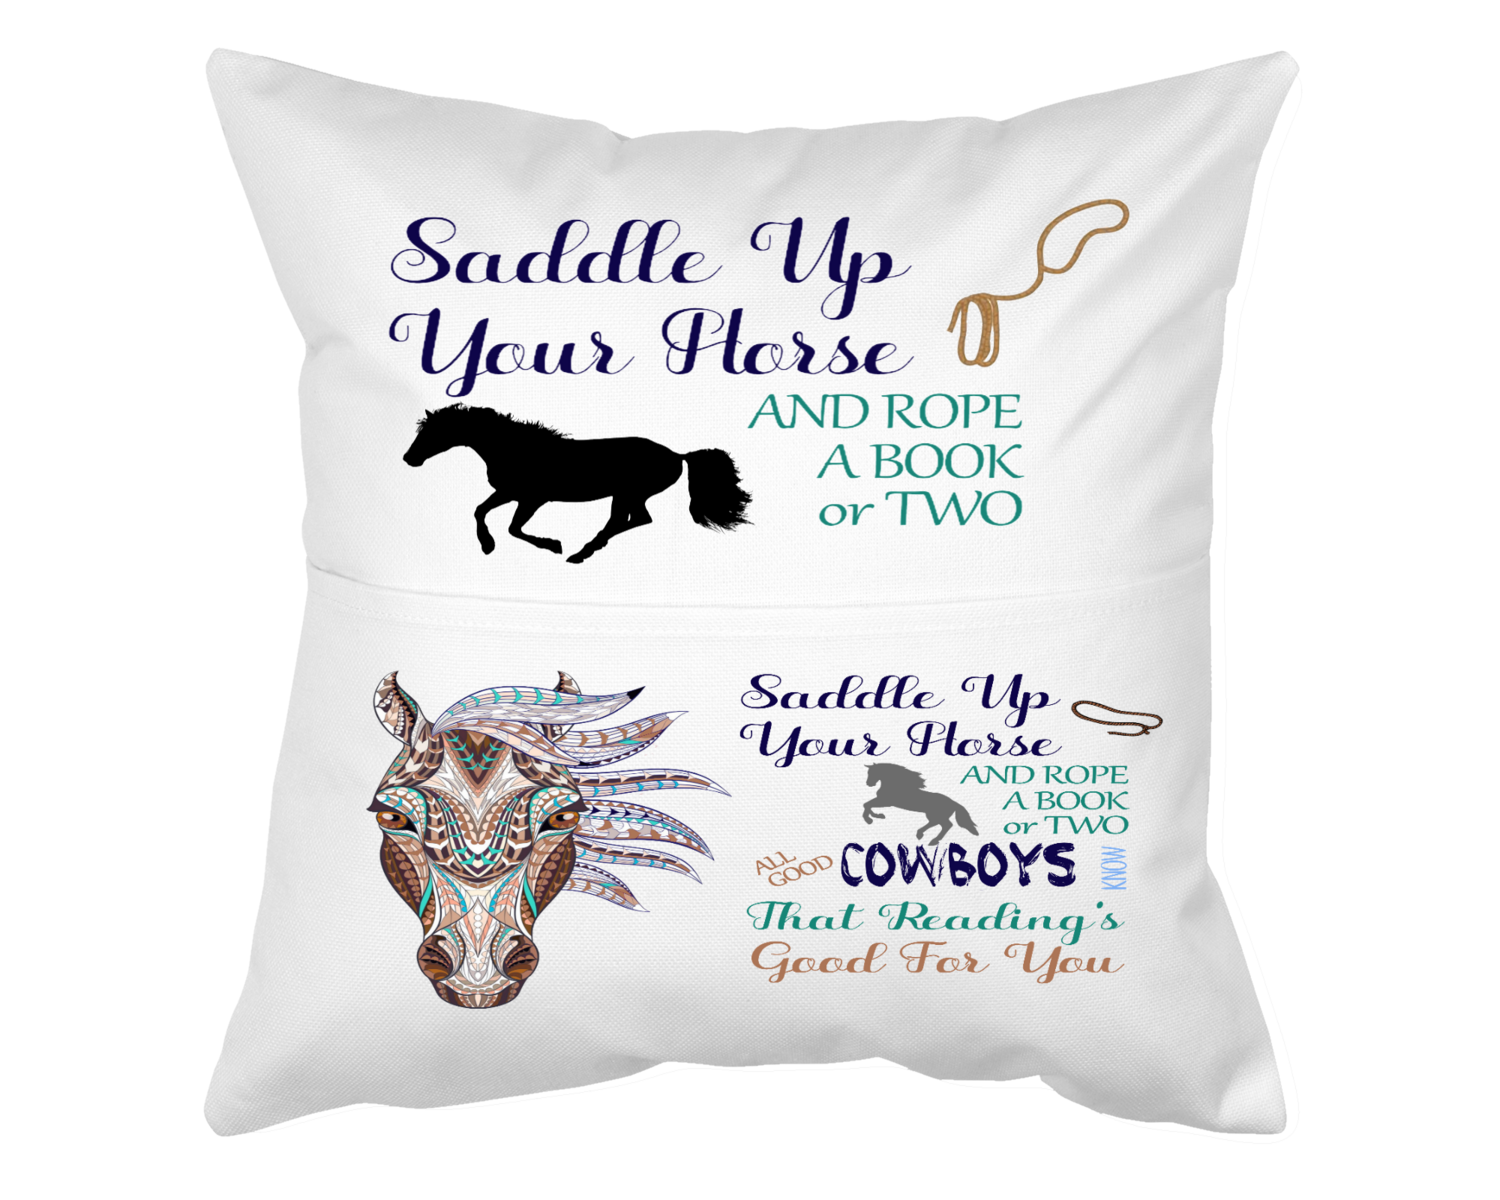 Pillow With Pocket: SADDLE UP A HORSE AND ROPE A BOOK OR TWO BOY/GIRL